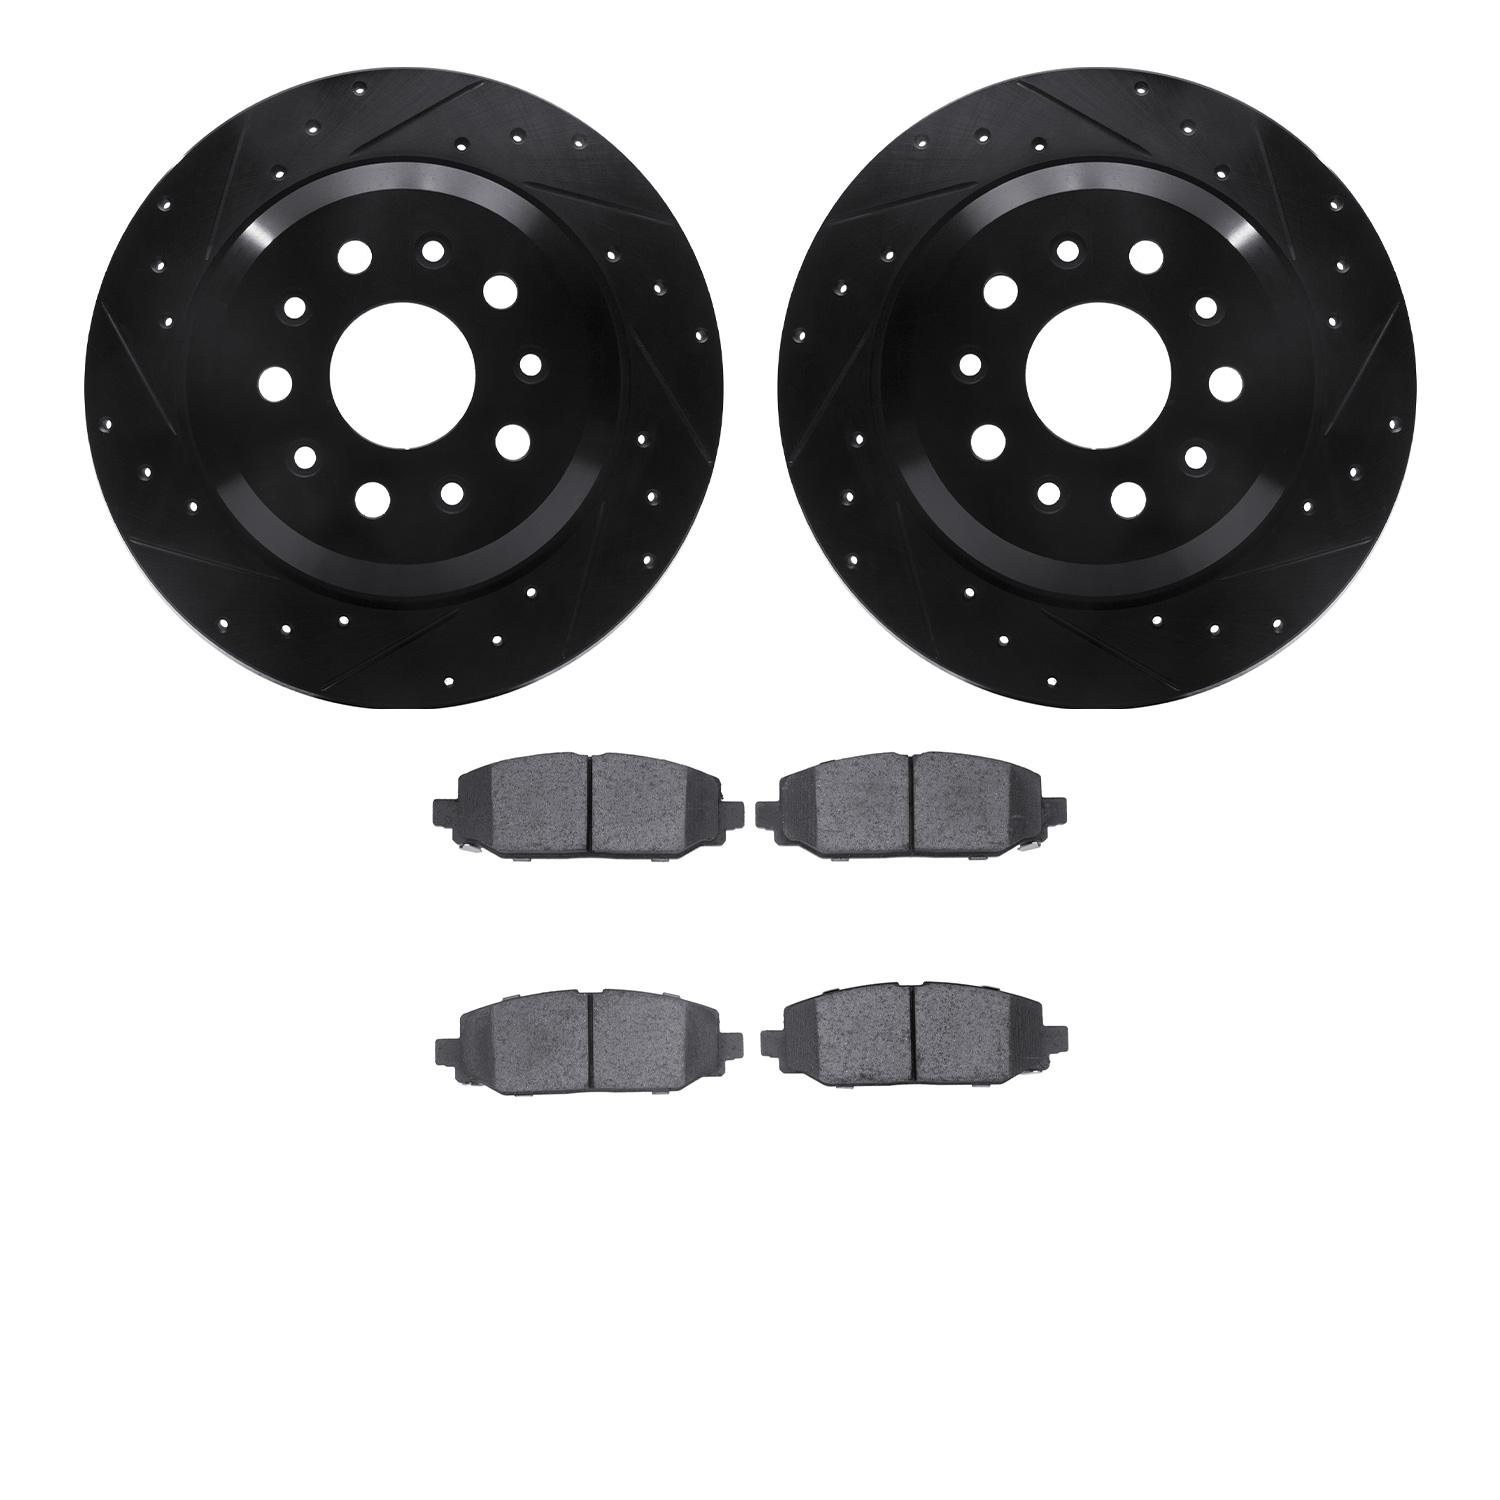 8402-42043 Drilled/Slotted Brake Rotors with Ultimate-Duty Brake Pads Kit [Black], Fits Select Mopar, Position: Rear